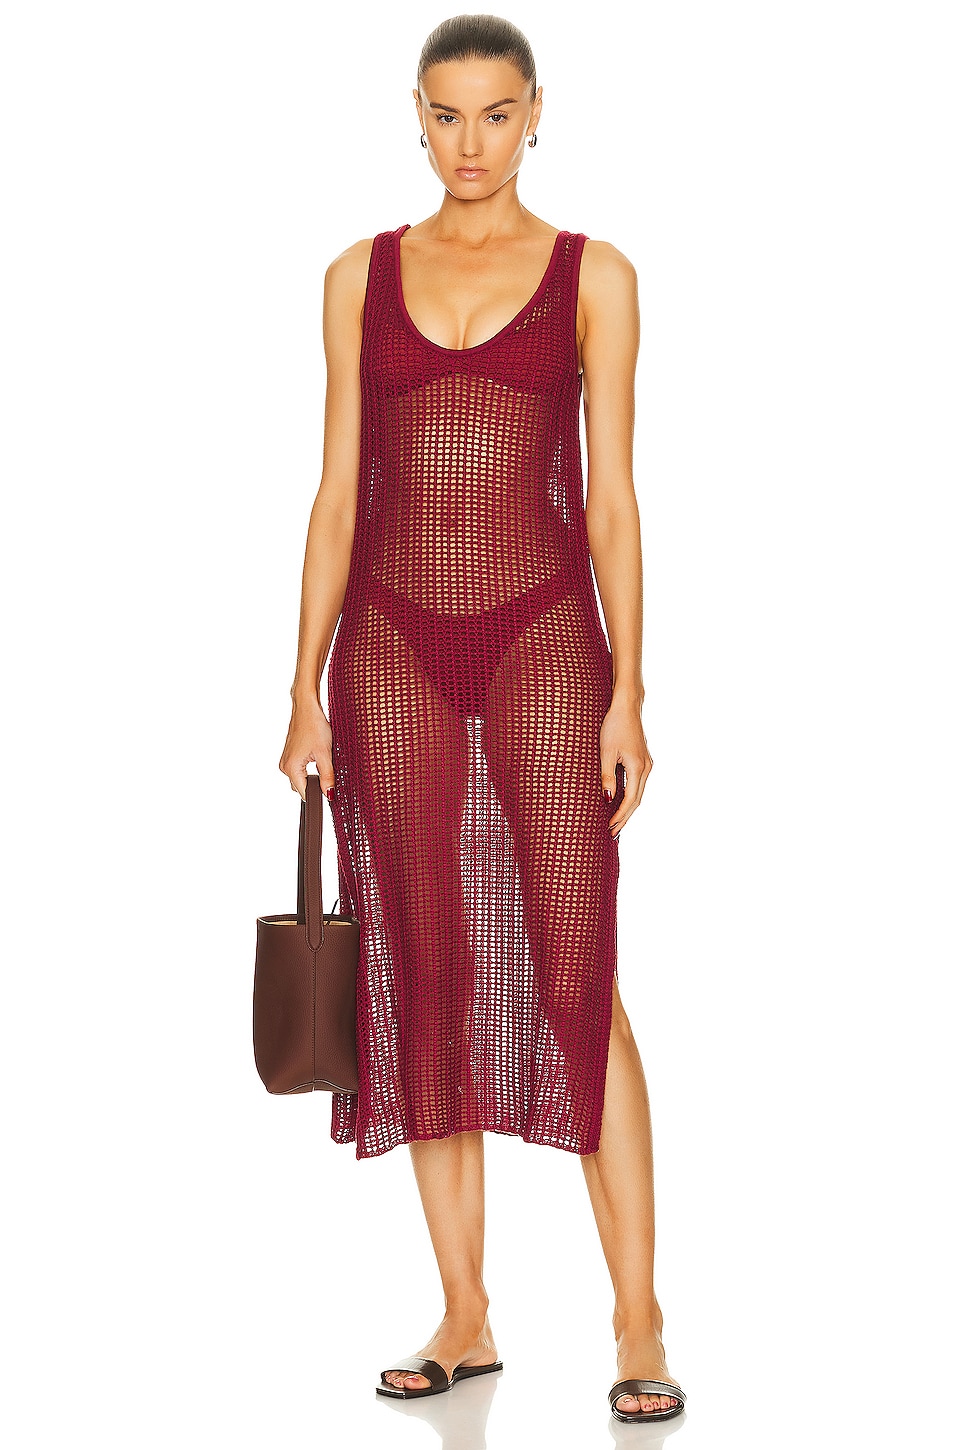 Image 1 of HAIGHT. Knit Beth Dress in Bordeaux